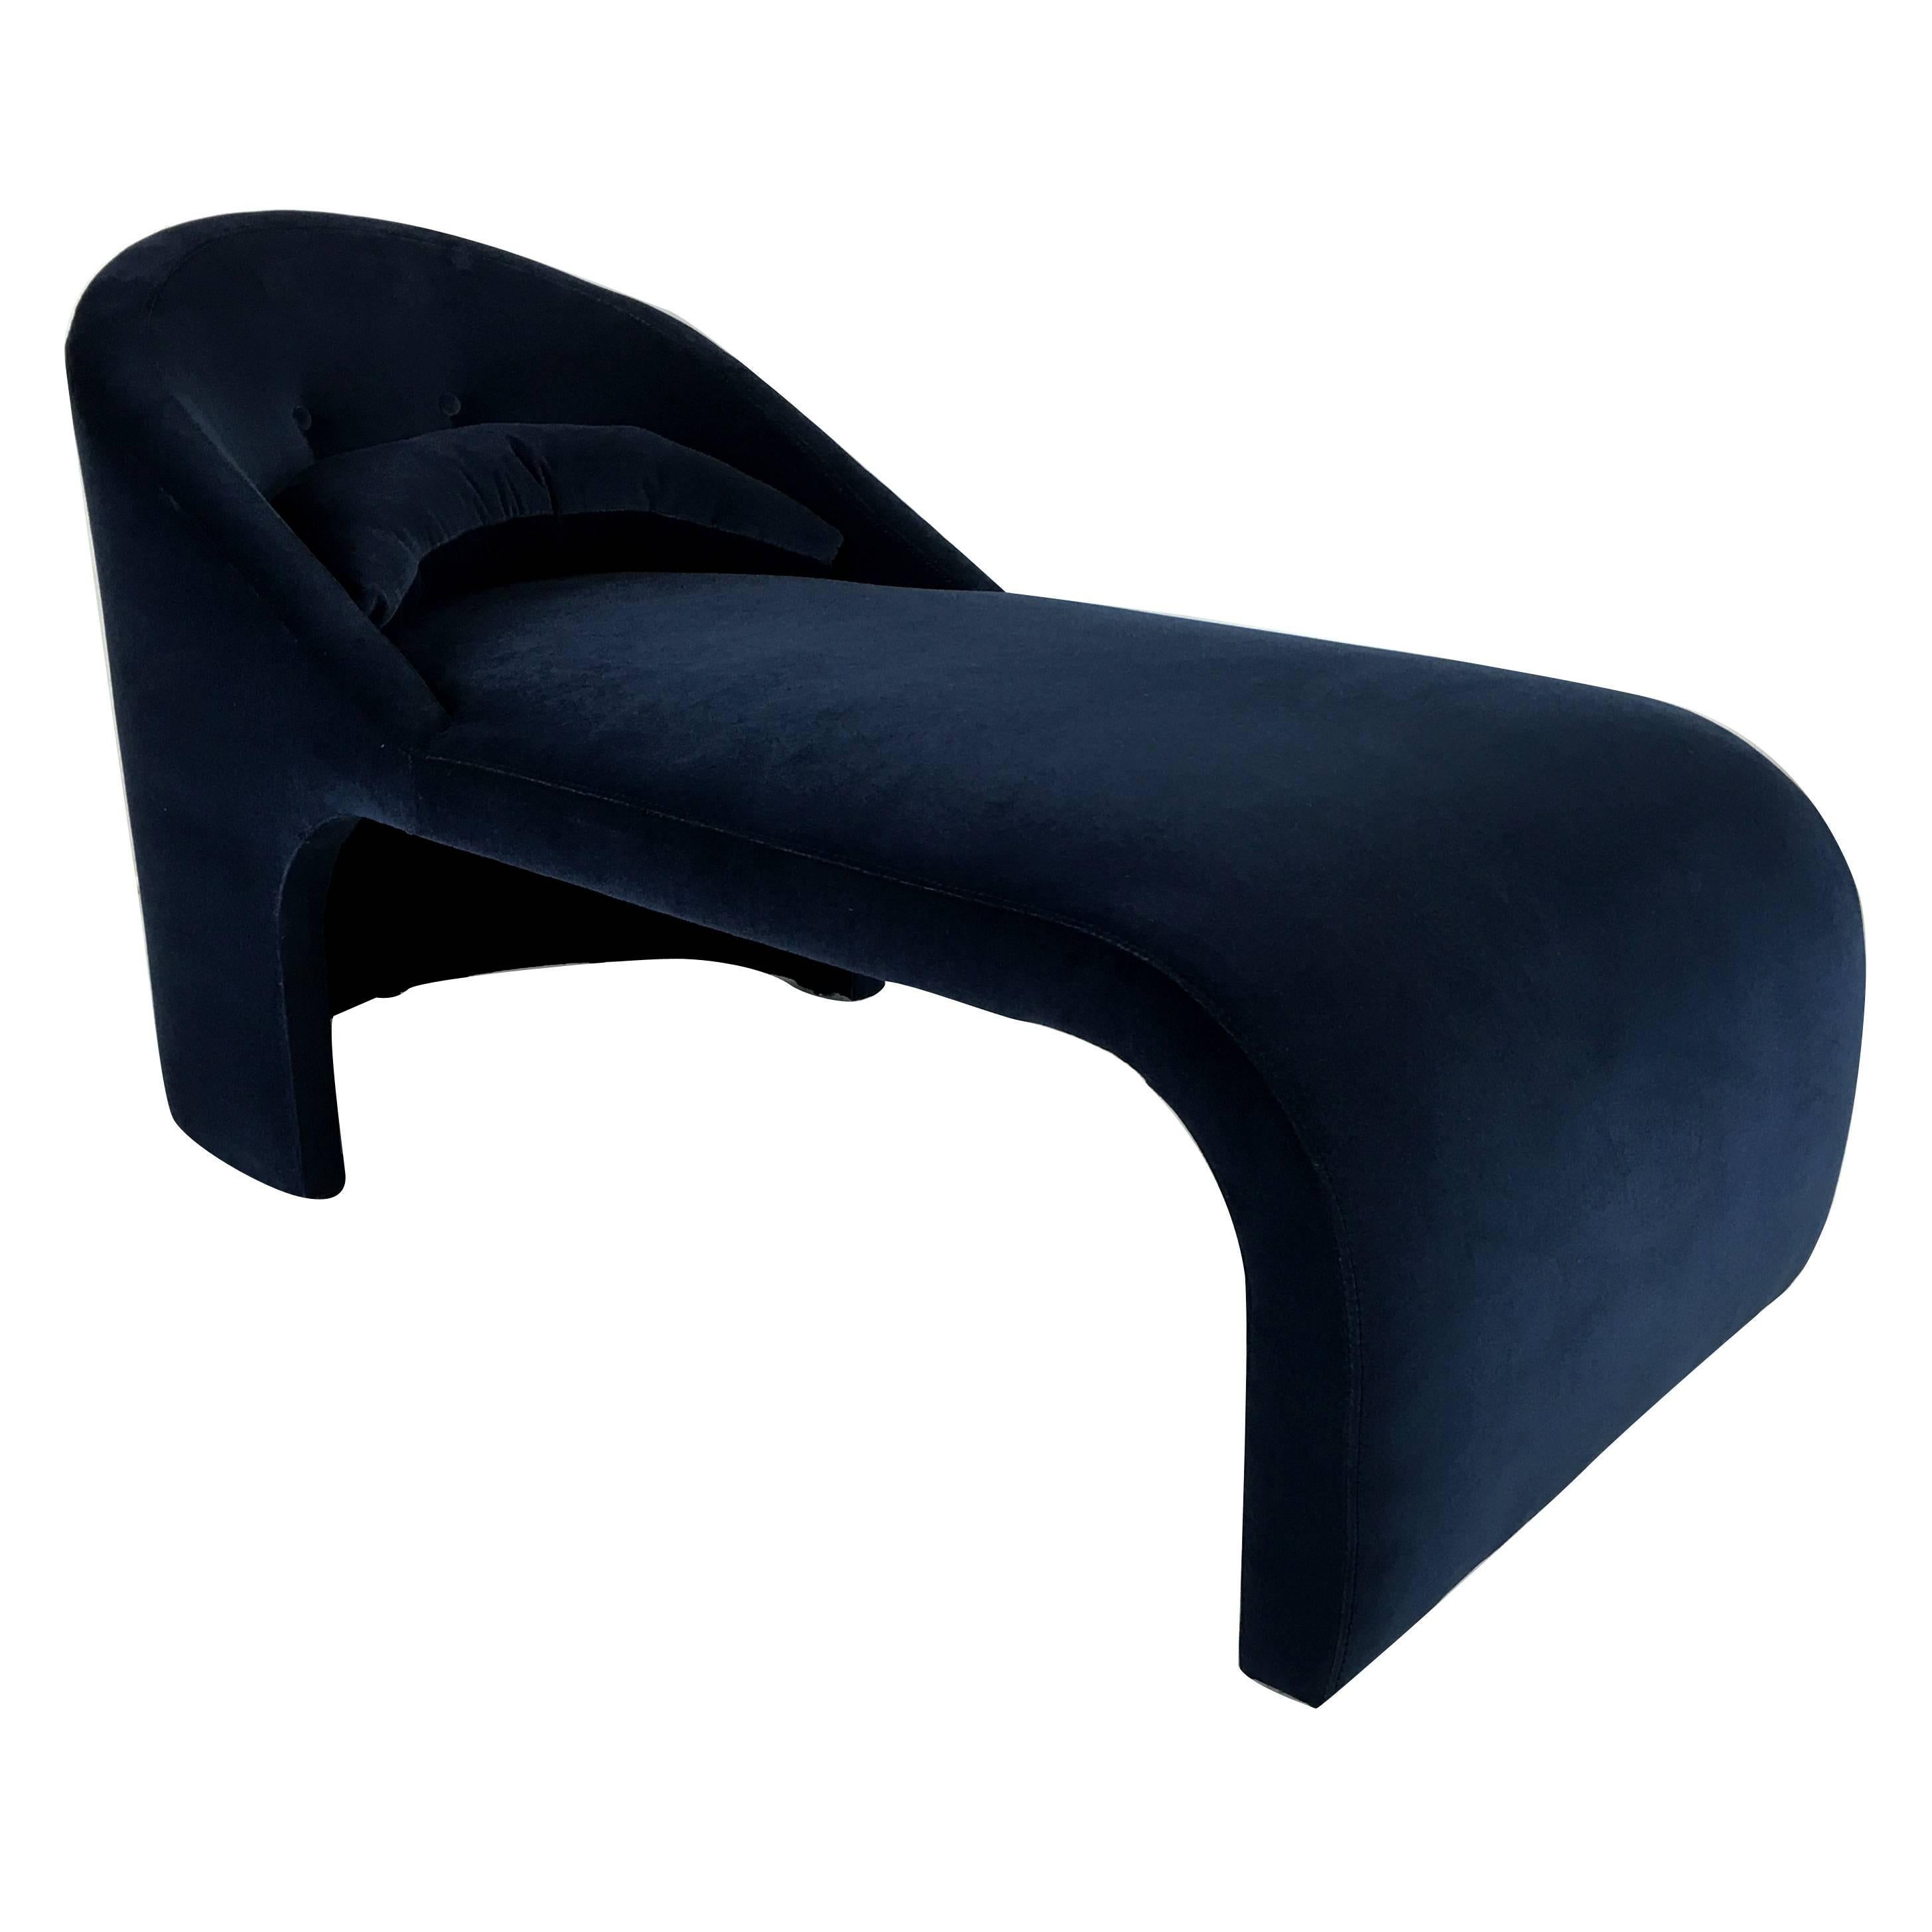 Fall Front Chaise Longue by Directional